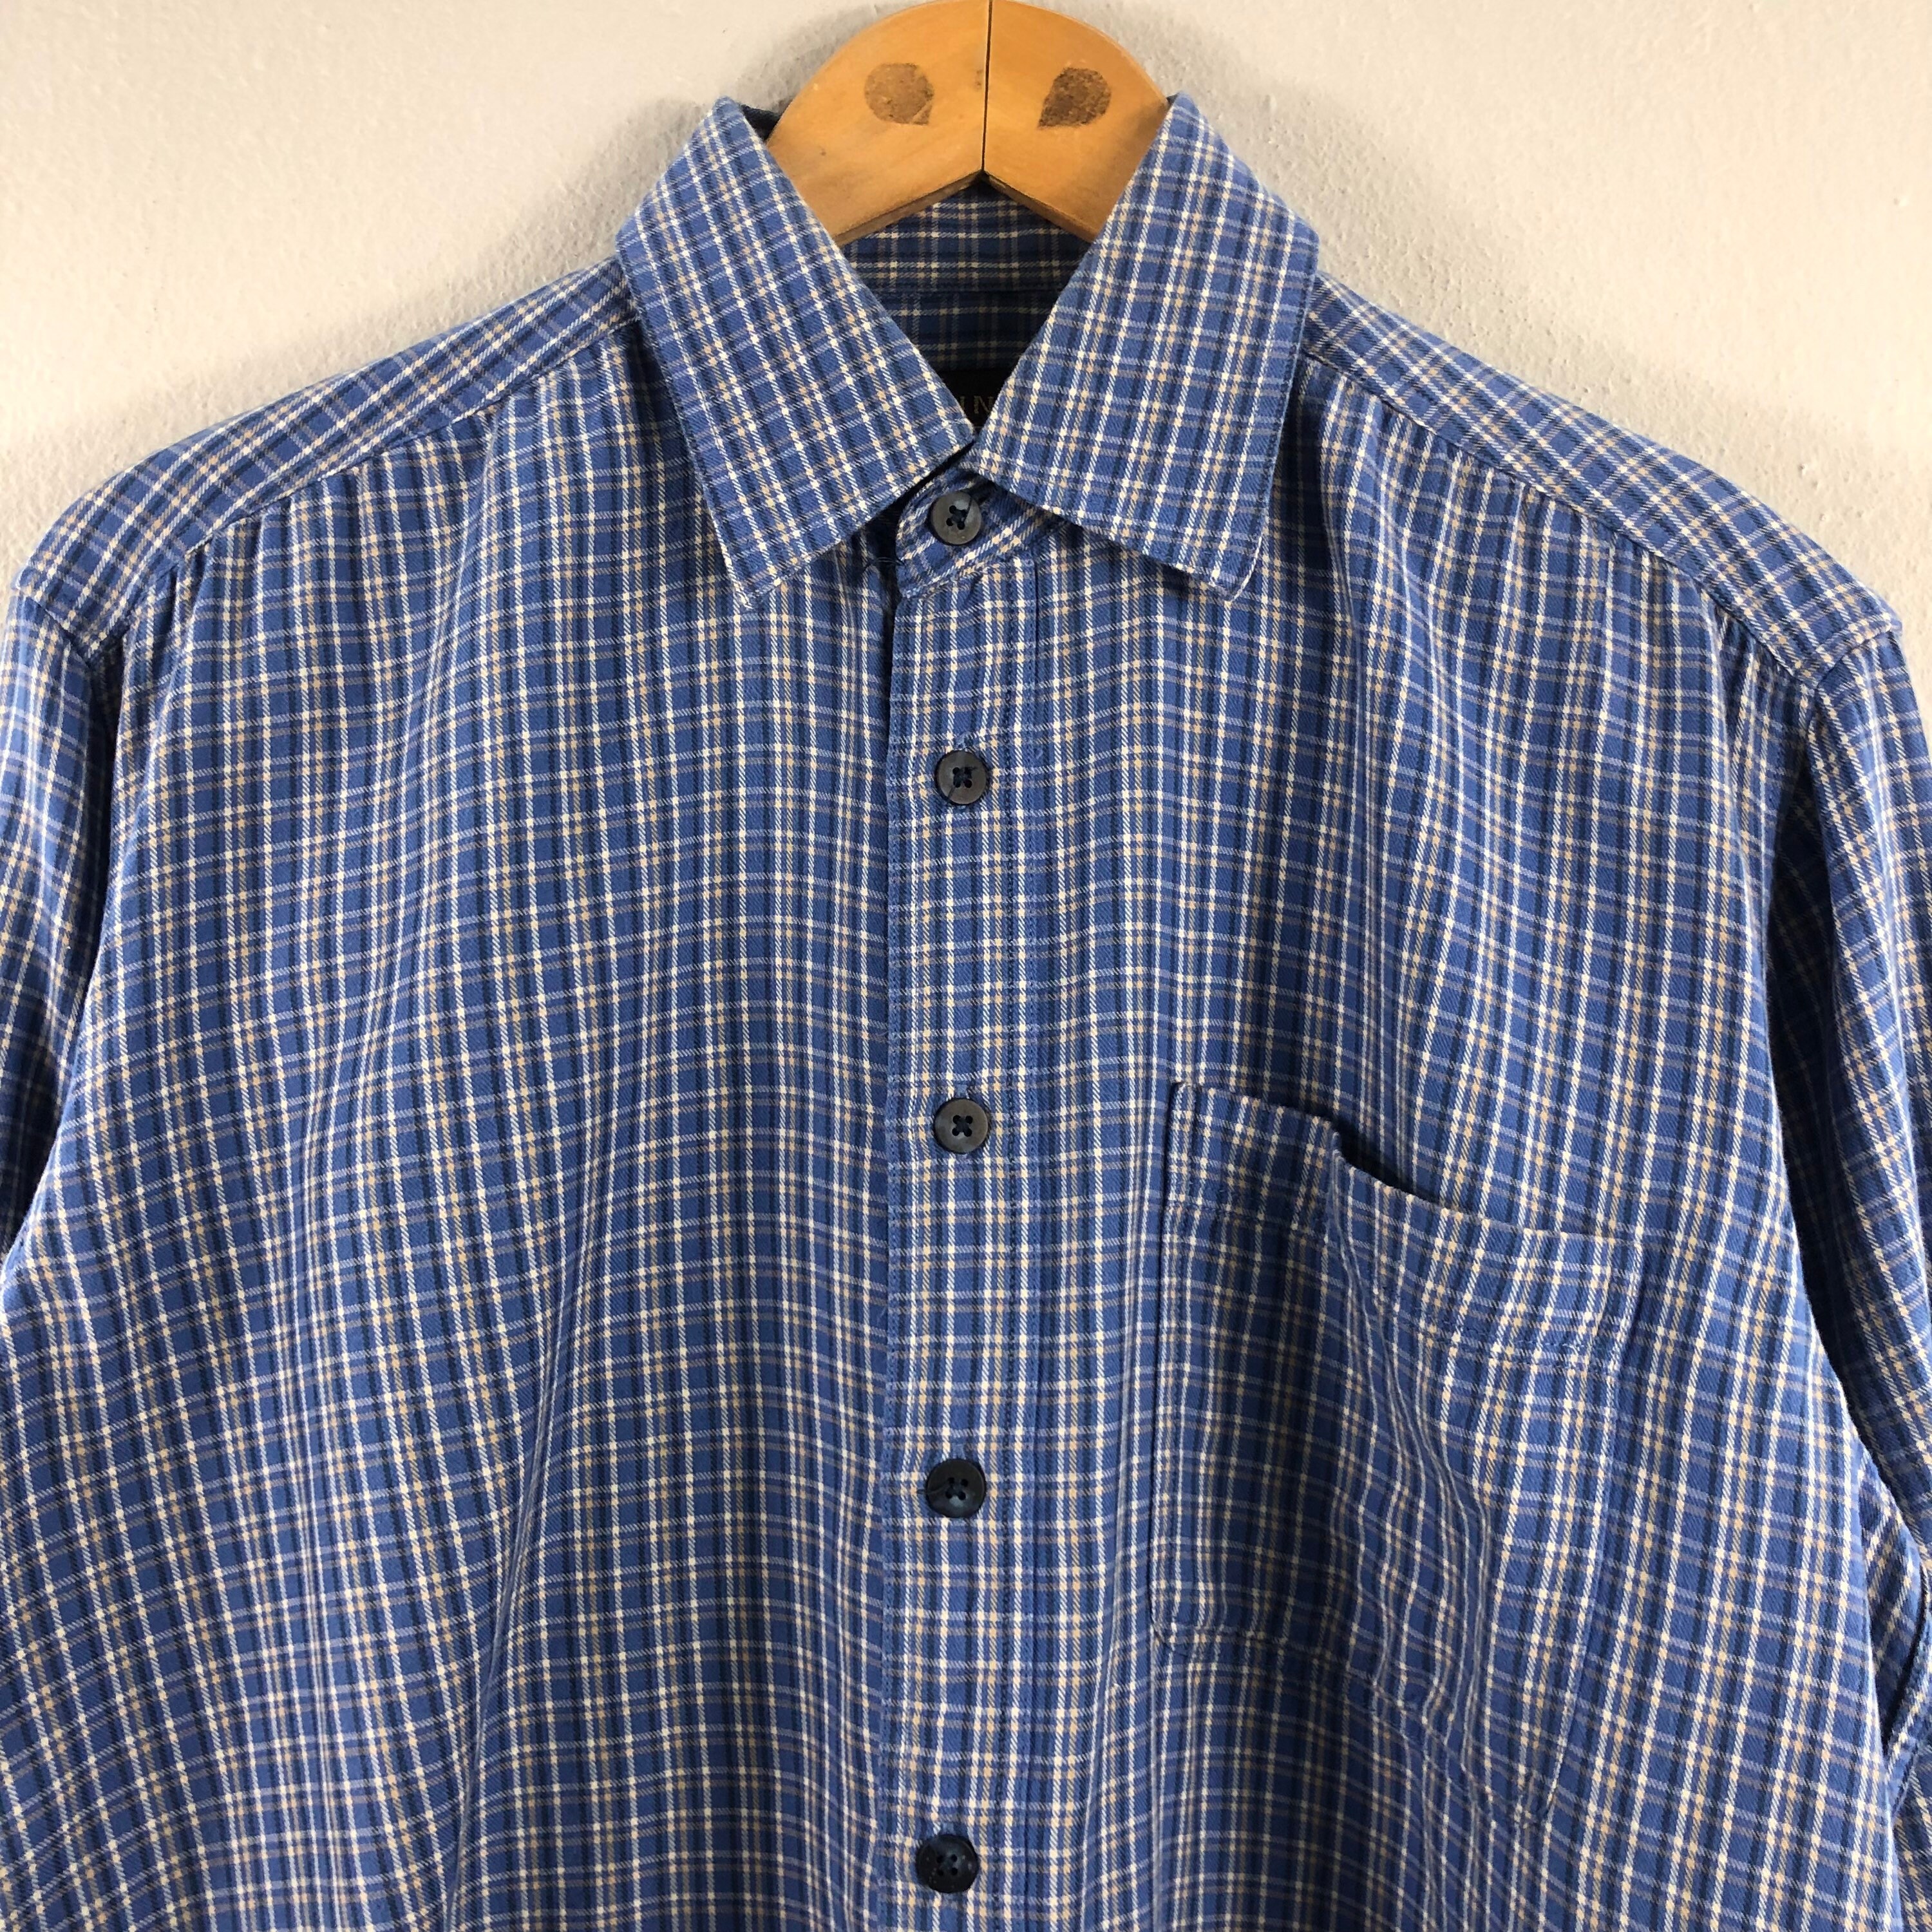 Flannel Volunt Etsy Button Medium Casual Outfit Wear Vintage Oxford Blue Longsleeve Brand Menswear - Outfits up Plaid Shirt Fashion Japanese